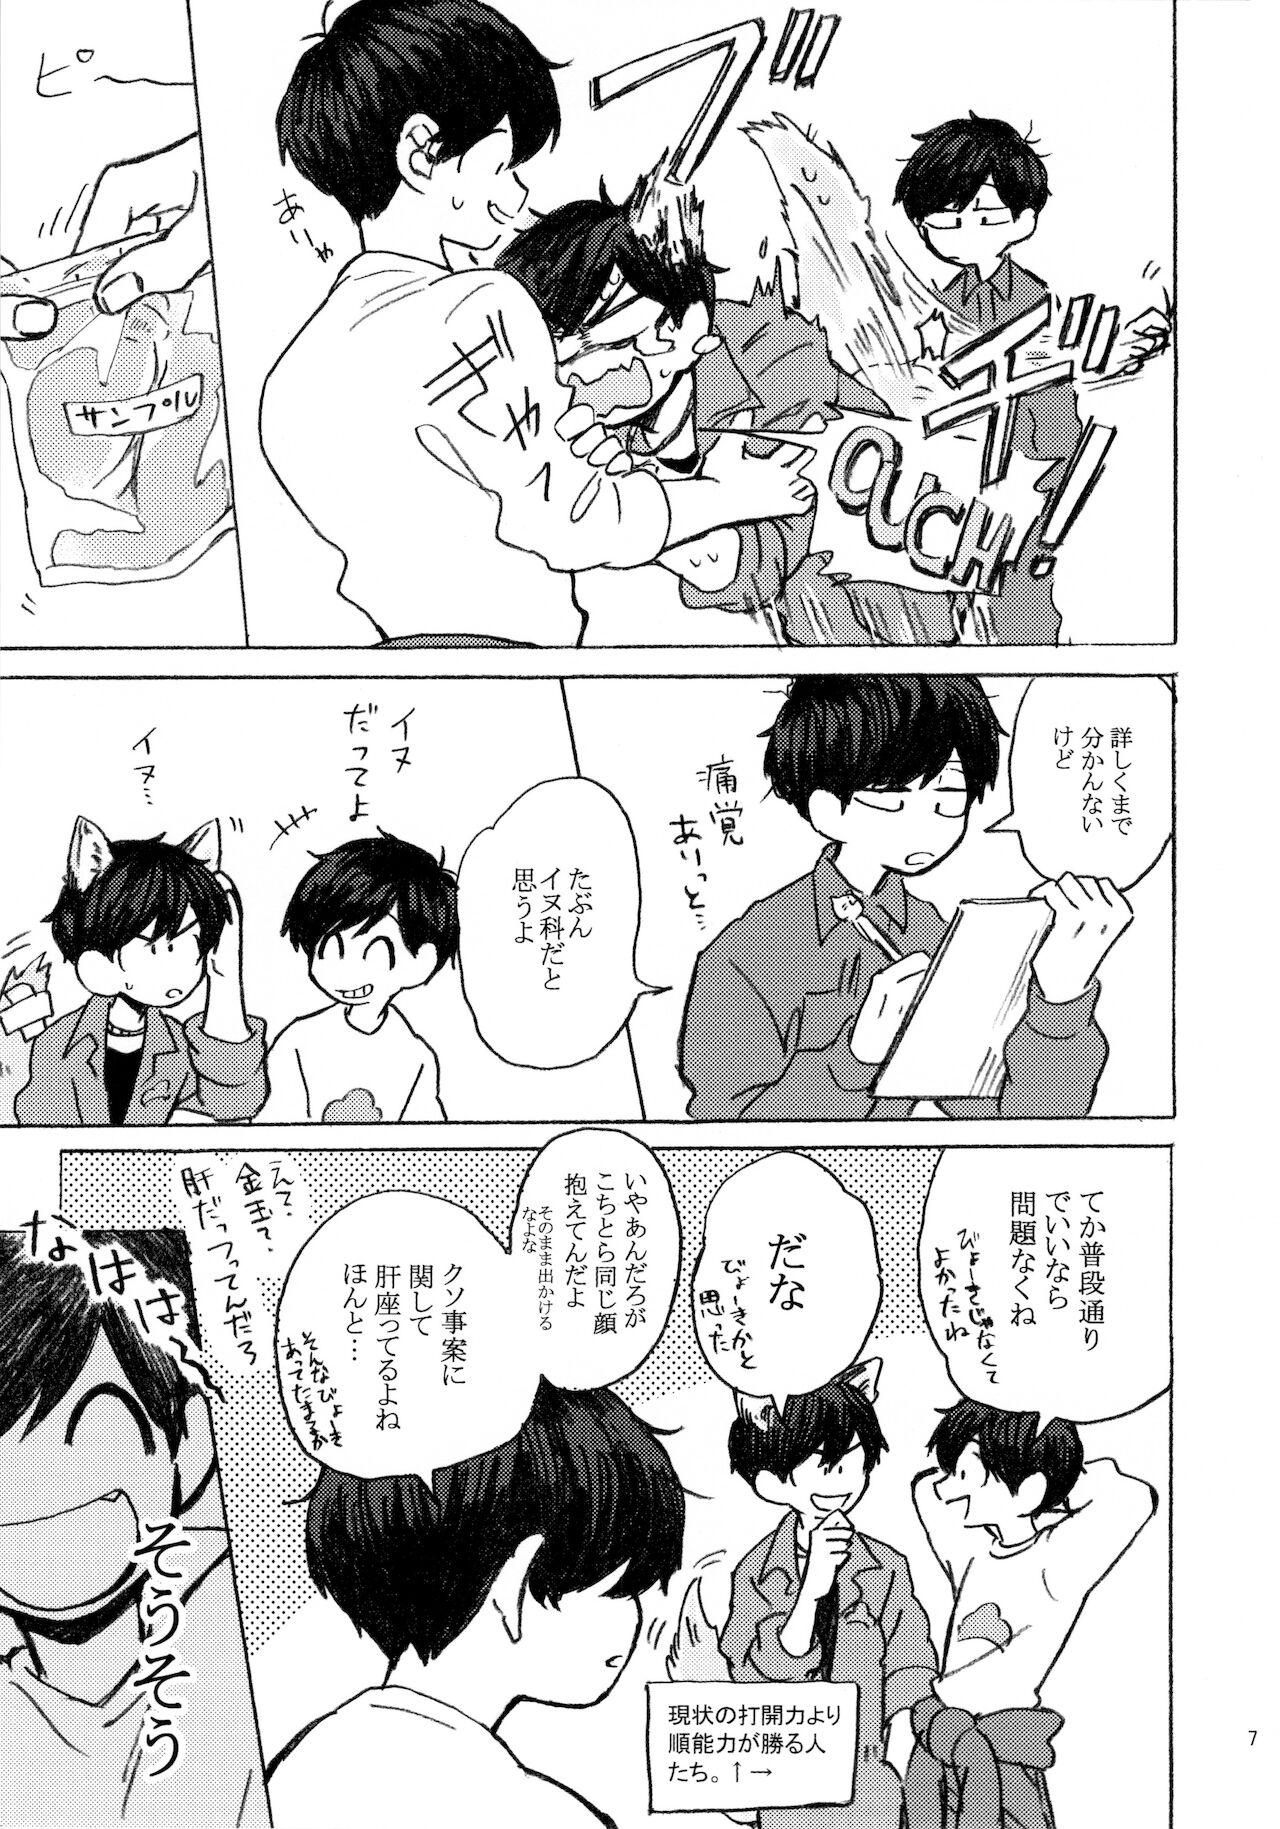 Blowjob PLEASE WAG YOUR TAIL ONLY TO ME. - Osomatsu-san Chica - Page 8